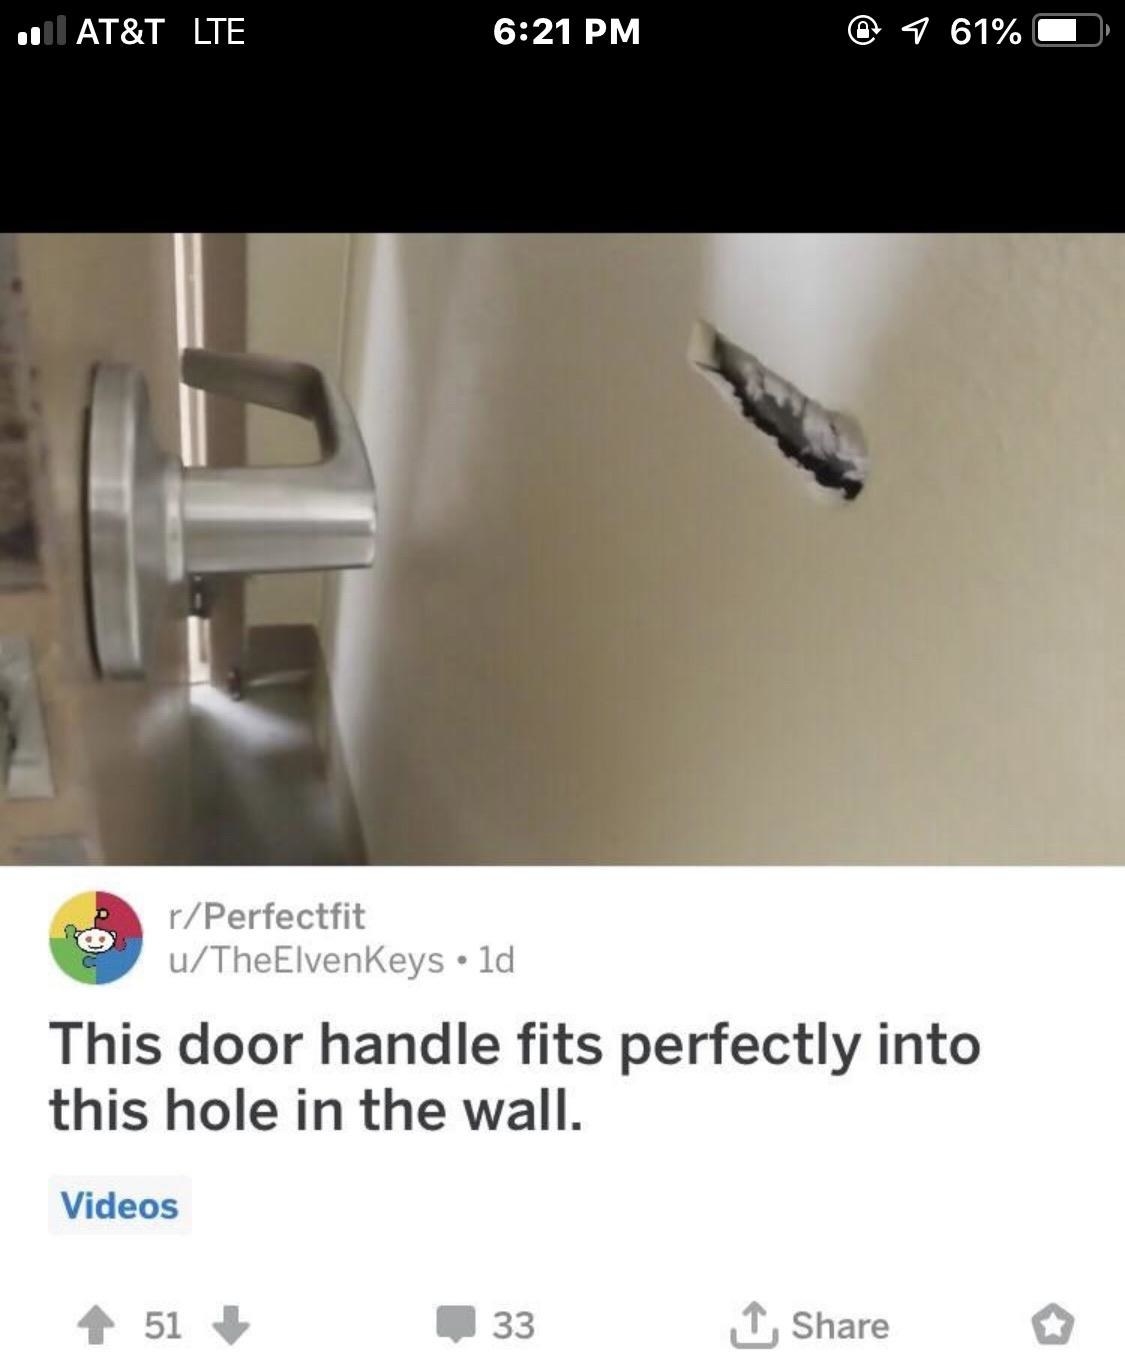 post on the perfect fit subreddit about a door handle fitting perfectly into a hole in the wall